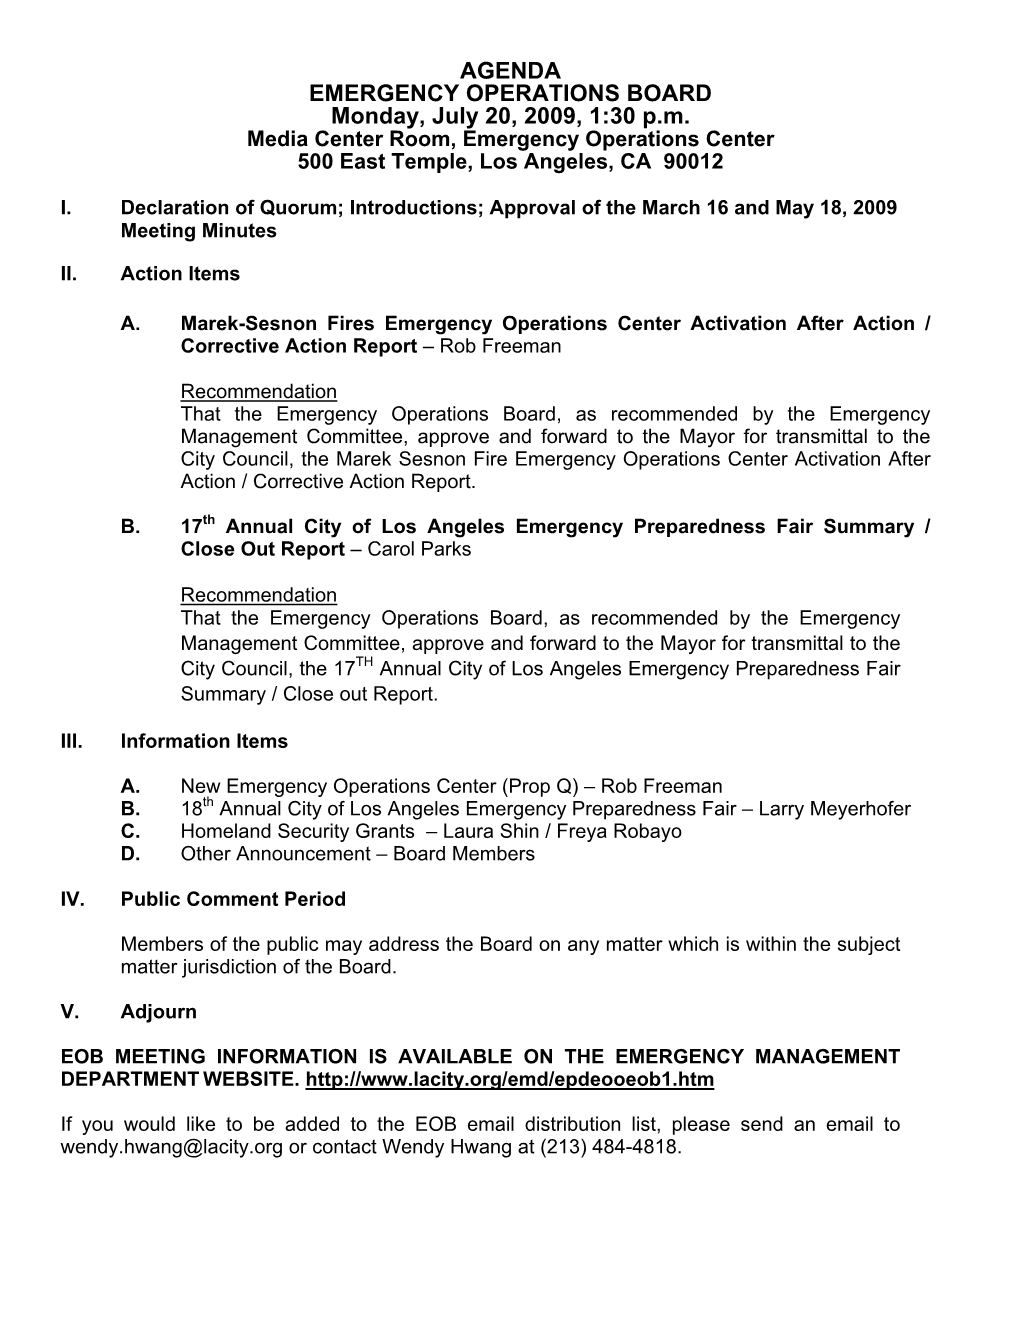 AGENDA EMERGENCY OPERATIONS BOARD Monday, July 20, 2009, 1:30 P.M. Media Center Room, Emergency Operations Center 500 East Temple, Los Angeles, CA 90012